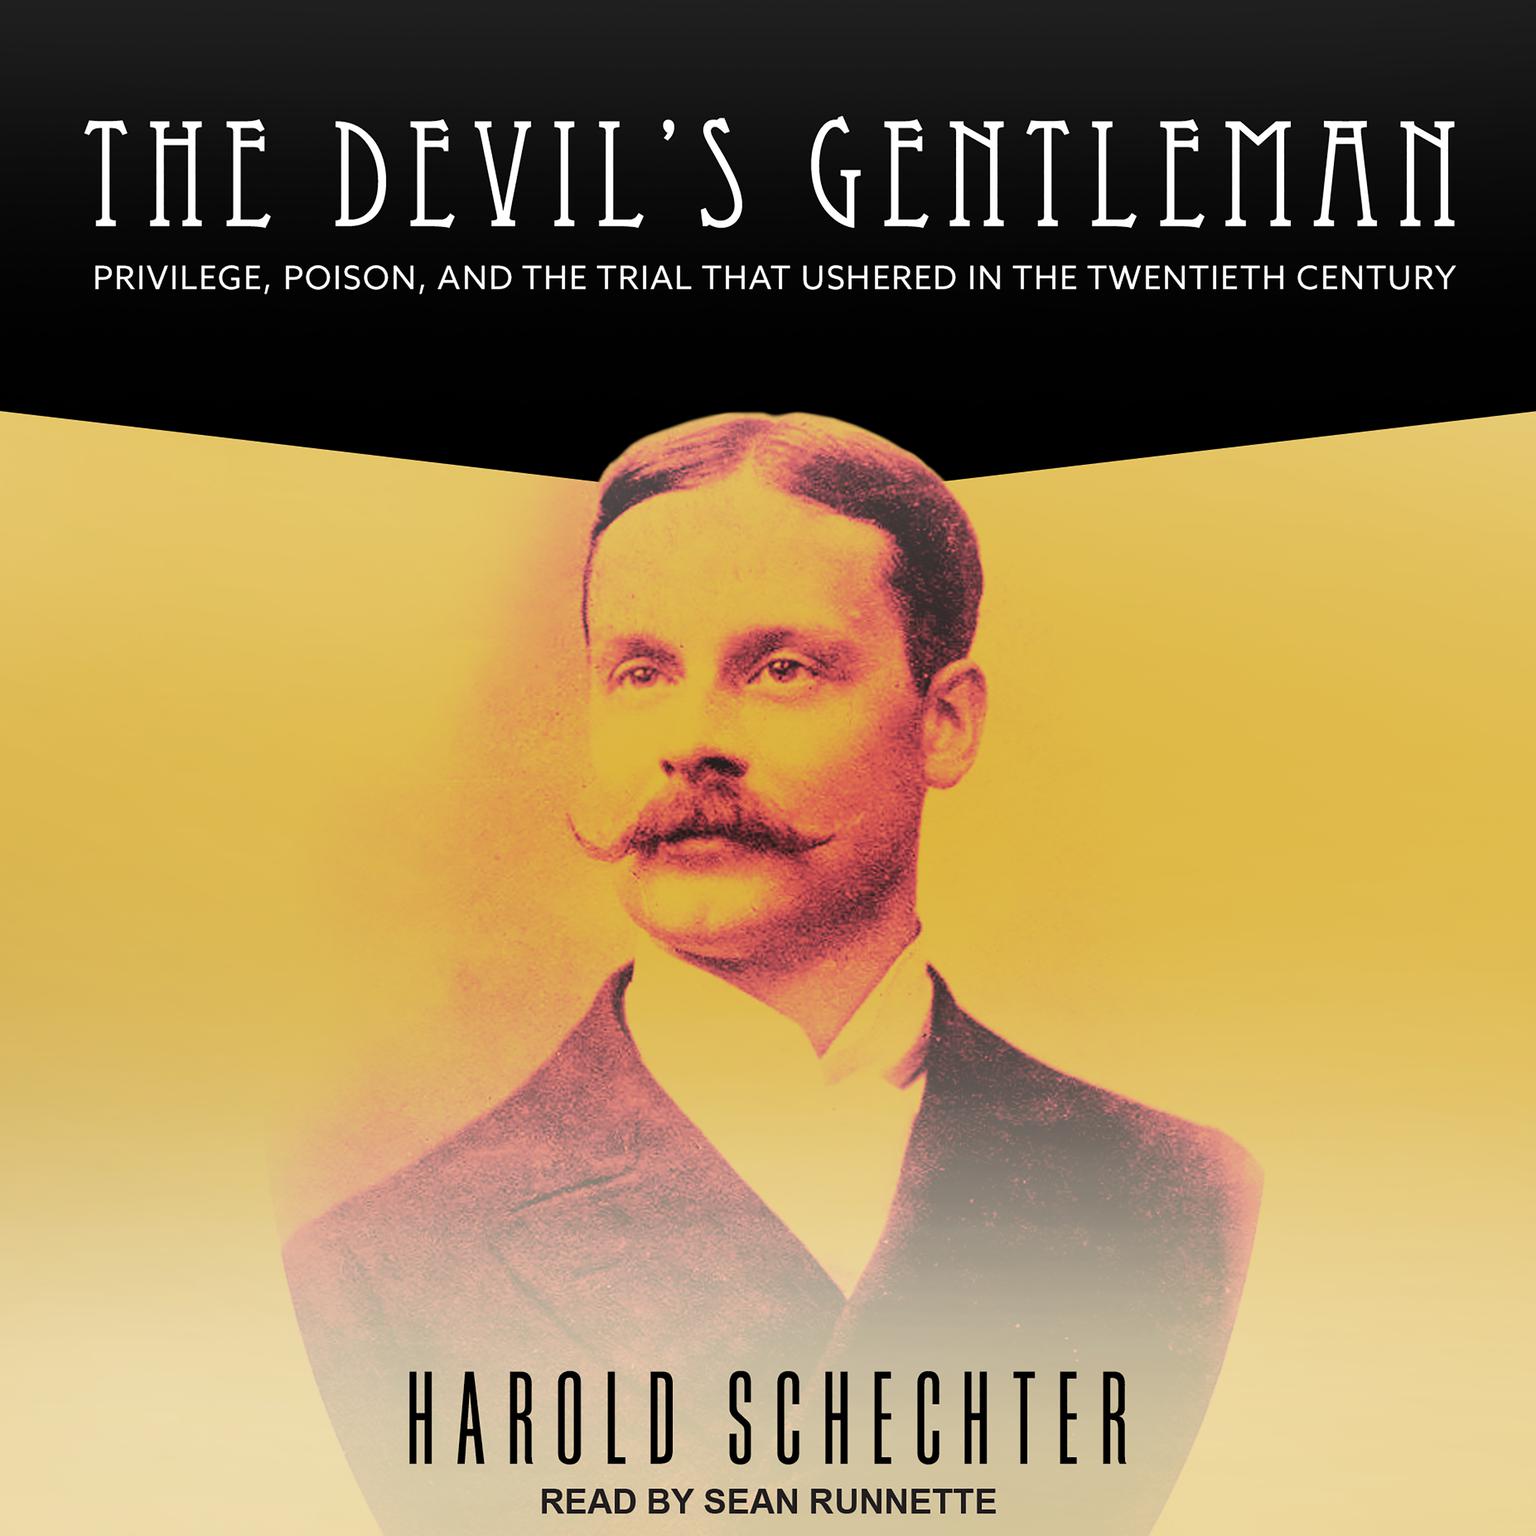 The Devils Gentleman: Privilege, Poison, and the Trial That Ushered in the Twentieth Century Audiobook, by Harold Schechter